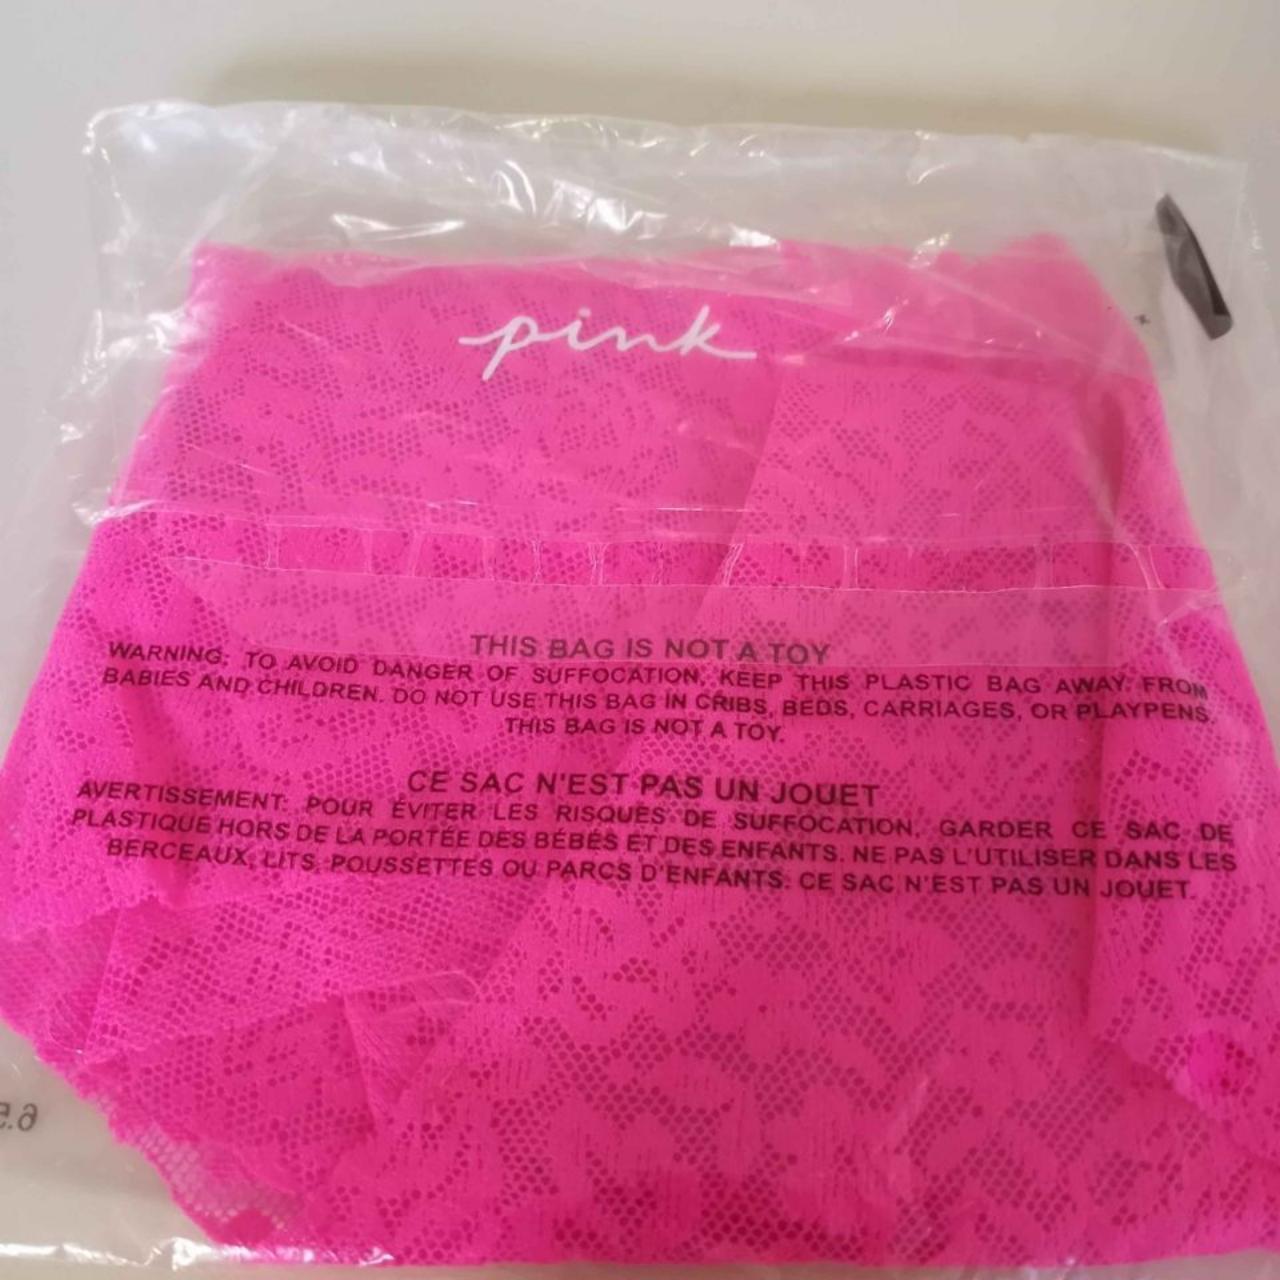 NWT Red Christmas thong #victoriasecret #pink - Depop